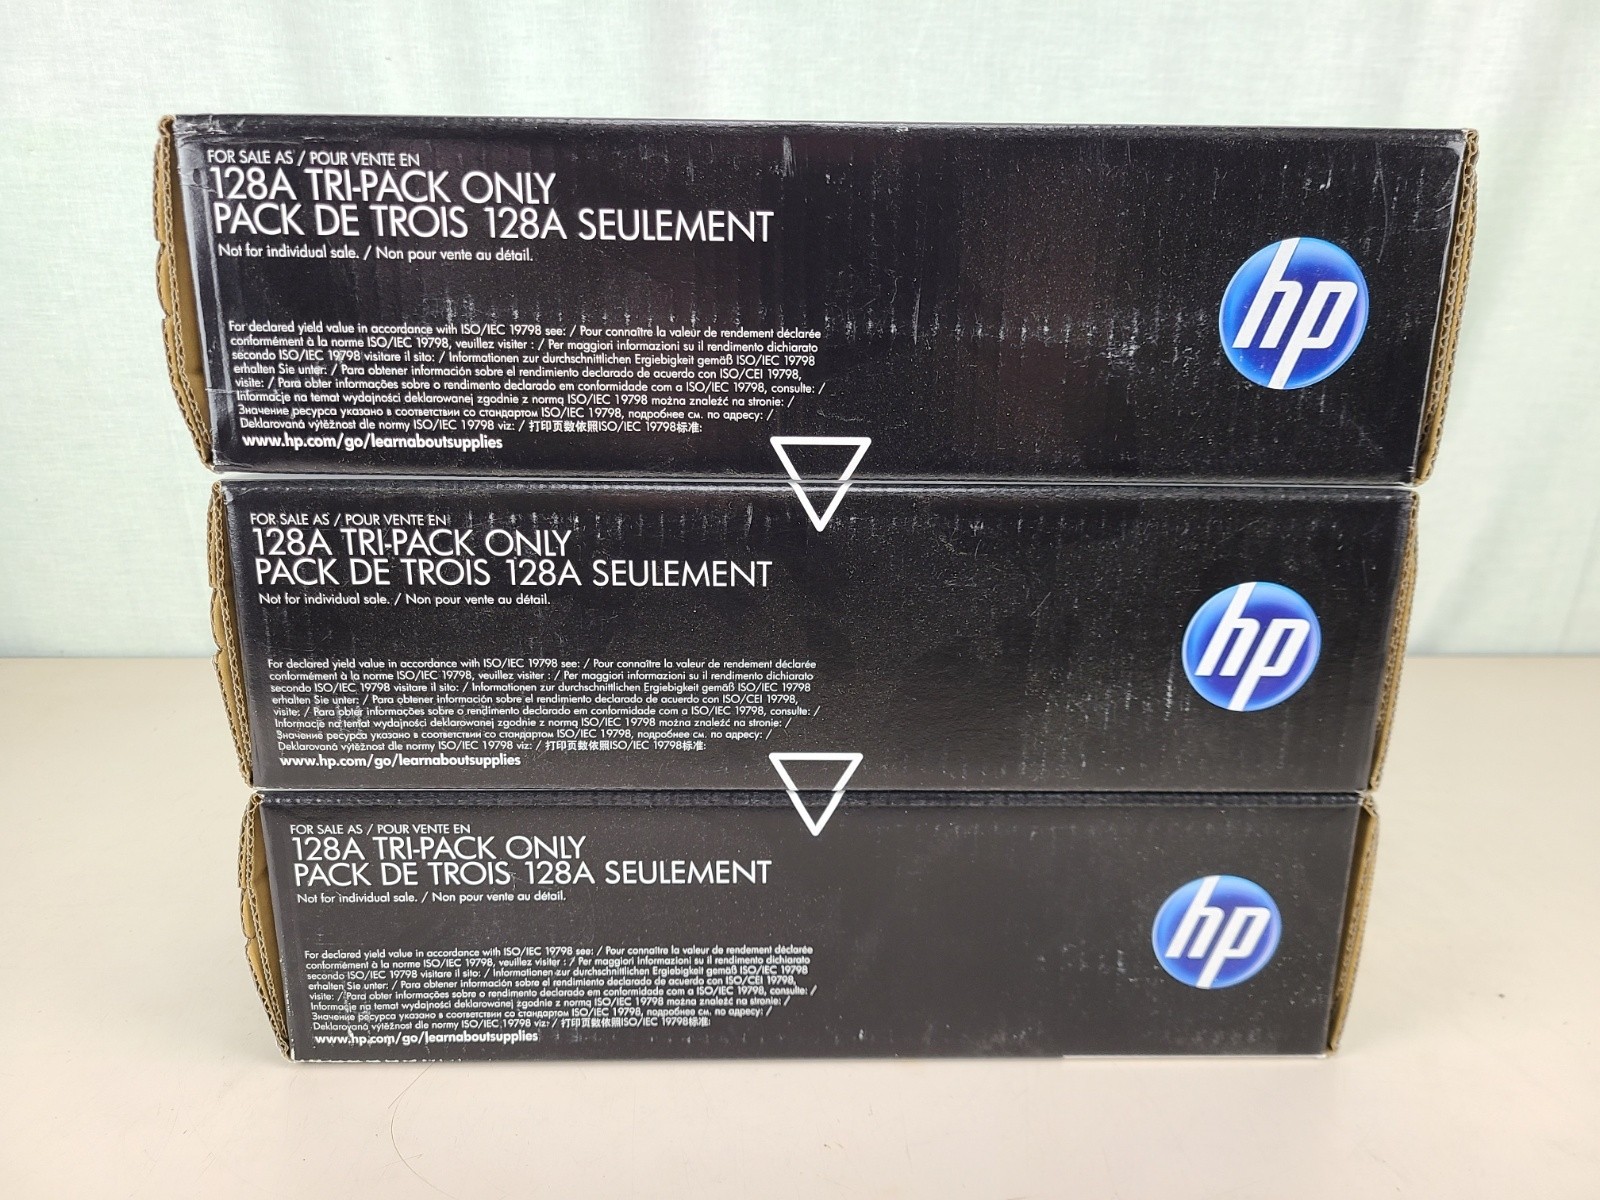 New HP 128A Tri-pack OEM Toners Cyan Magenta Yellow CE321A CE322A CE323A SEALED